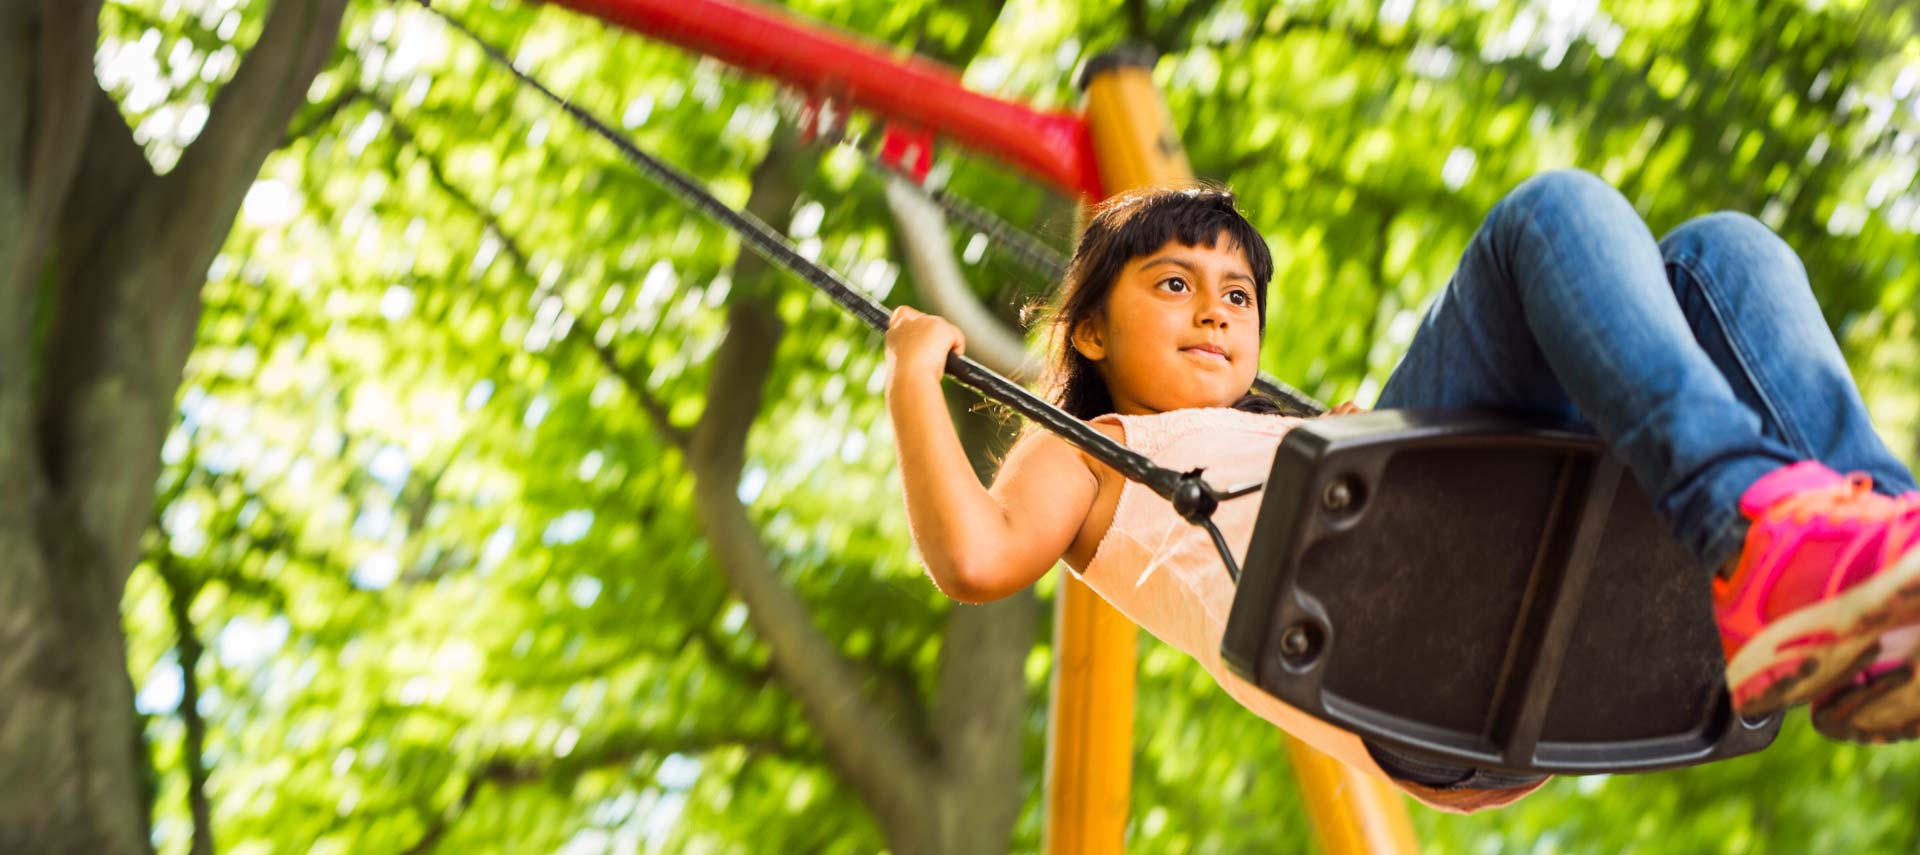 Melbourne’s Top Ten Family-Friendly Playgrounds, Parks and Gardens